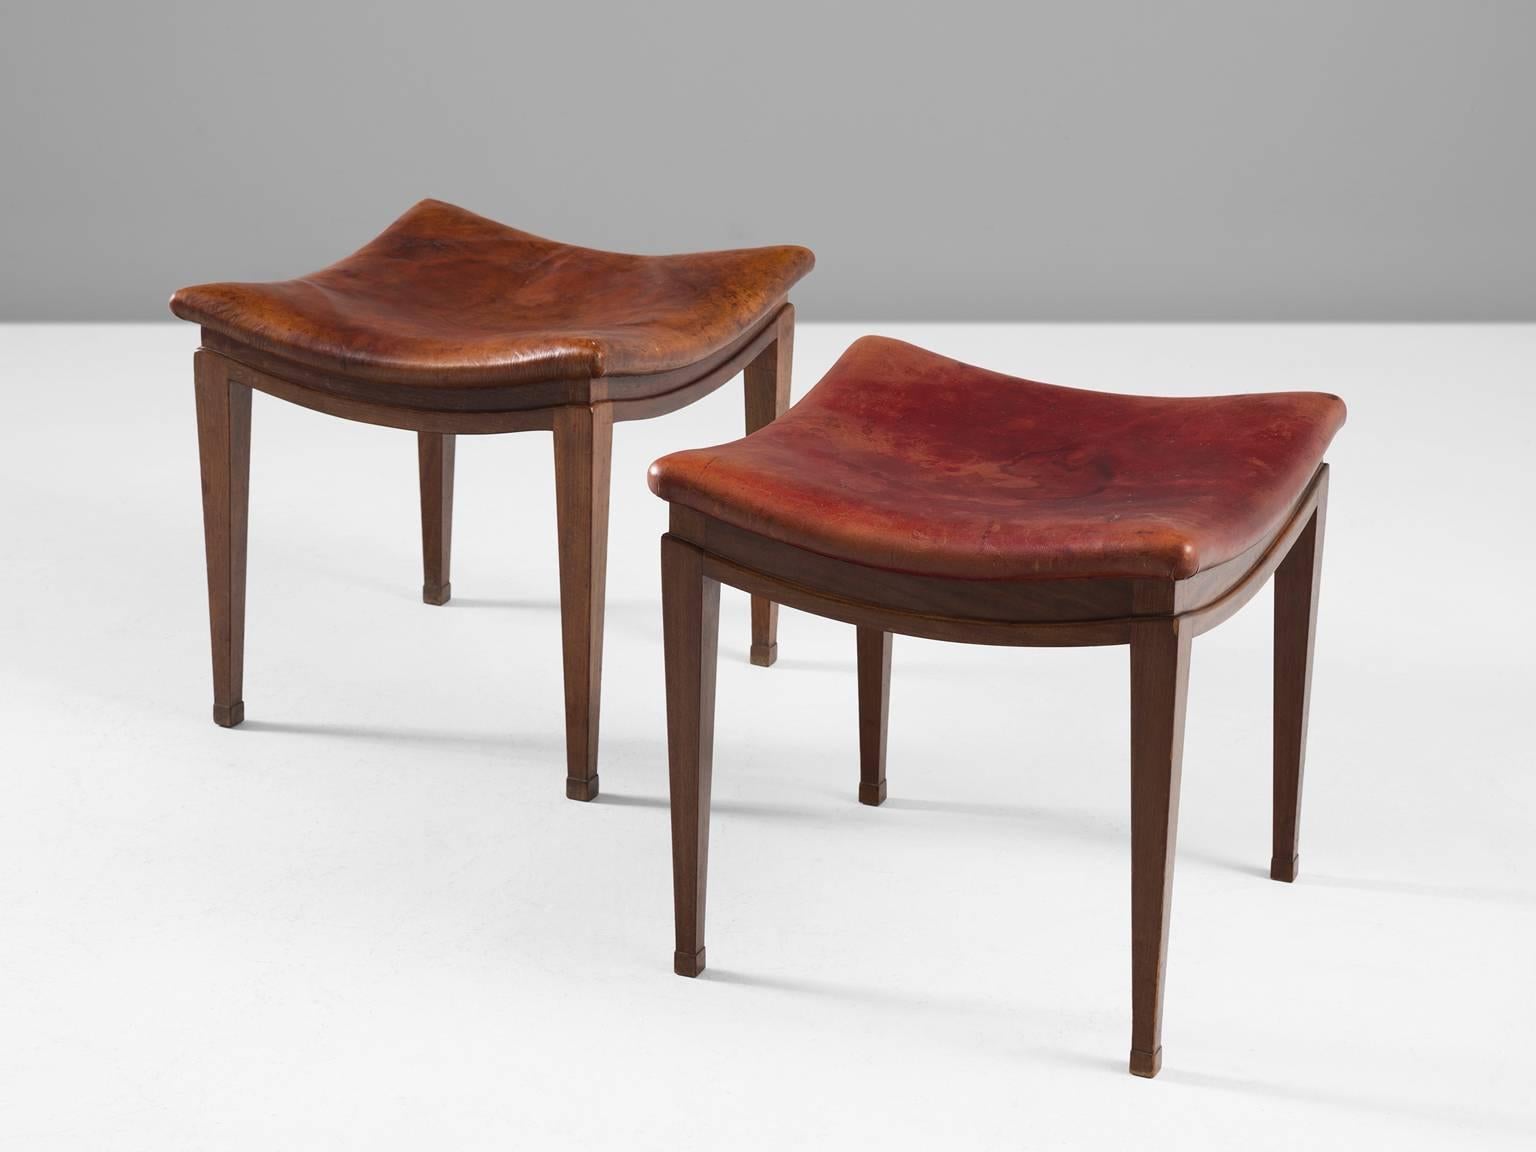 Set of two stools, in mahogany and leather, by Frits Henningsen, Denmark, 1940s.

A pair of stools in mahogany, upholstered in red and cognac leather. The great craftsmanship of Frits Henningsen is directly visible on these stools. Beautiful